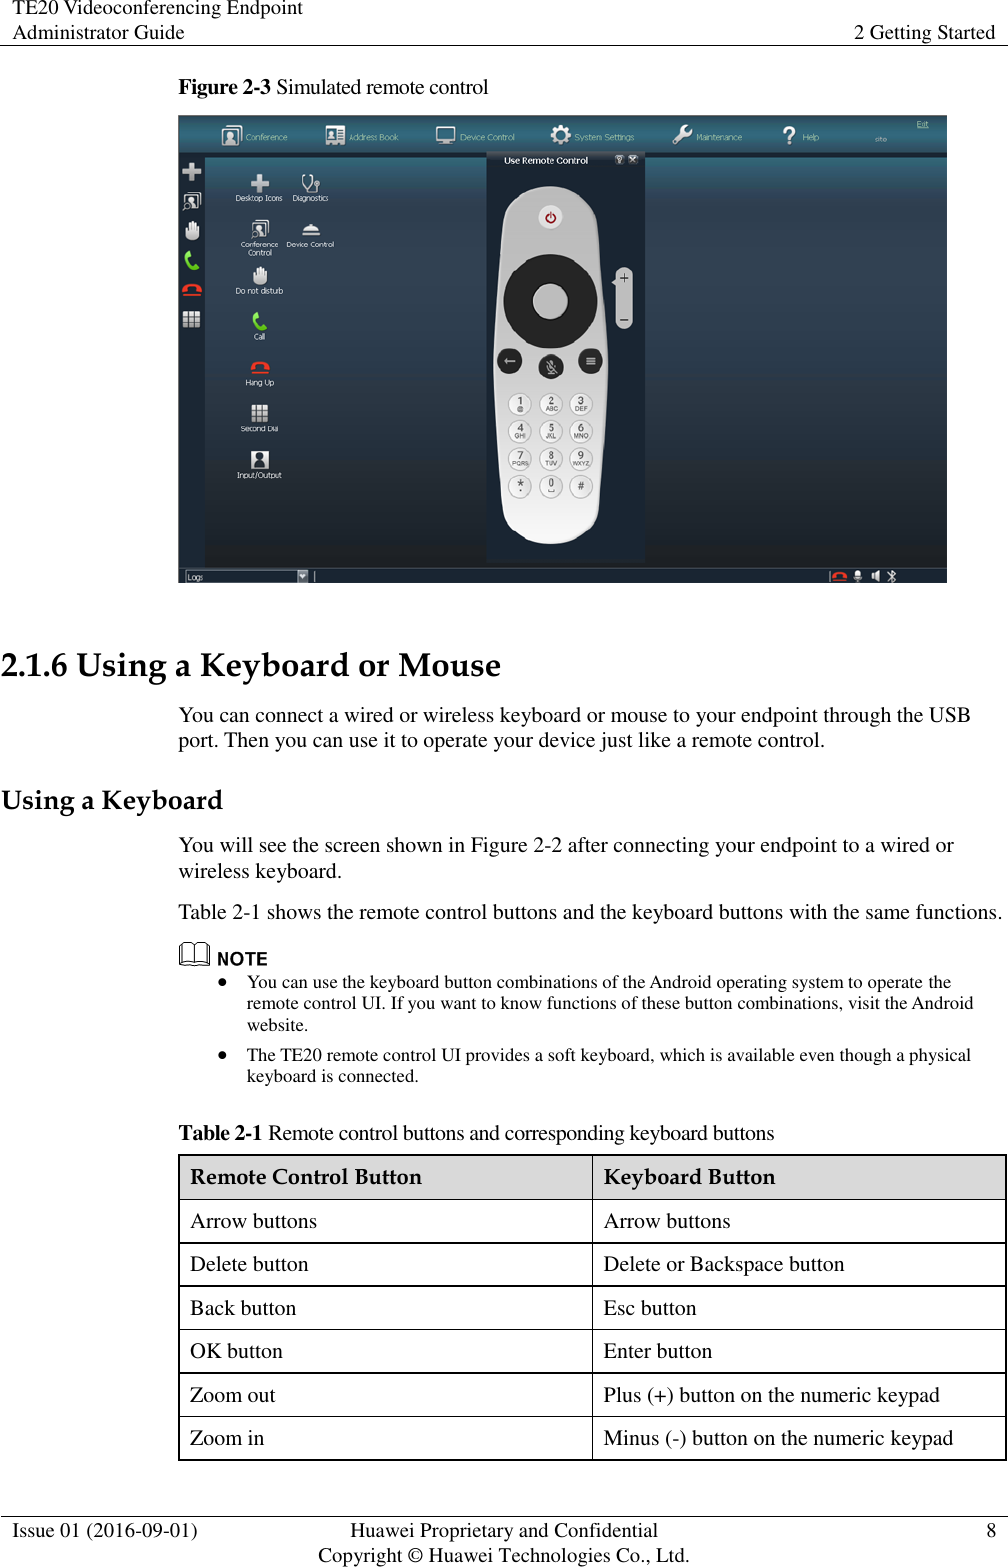 TE20 Videoconferencing Endpoint Administrator Guide 2 Getting Started  Issue 01 (2016-09-01) Huawei Proprietary and Confidential                                     Copyright © Huawei Technologies Co., Ltd. 8  Figure 2-3 Simulated remote control   2.1.6 Using a Keyboard or Mouse You can connect a wired or wireless keyboard or mouse to your endpoint through the USB port. Then you can use it to operate your device just like a remote control. Using a Keyboard You will see the screen shown in Figure 2-2 after connecting your endpoint to a wired or wireless keyboard. Table 2-1 shows the remote control buttons and the keyboard buttons with the same functions.     You can use the keyboard button combinations of the Android operating system to operate the remote control UI. If you want to know functions of these button combinations, visit the Android website.  The TE20 remote control UI provides a soft keyboard, which is available even though a physical keyboard is connected. Table 2-1 Remote control buttons and corresponding keyboard buttons Remote Control Button Keyboard Button Arrow buttons Arrow buttons Delete button Delete or Backspace button Back button Esc button OK button Enter button Zoom out Plus (+) button on the numeric keypad Zoom in Minus (-) button on the numeric keypad 